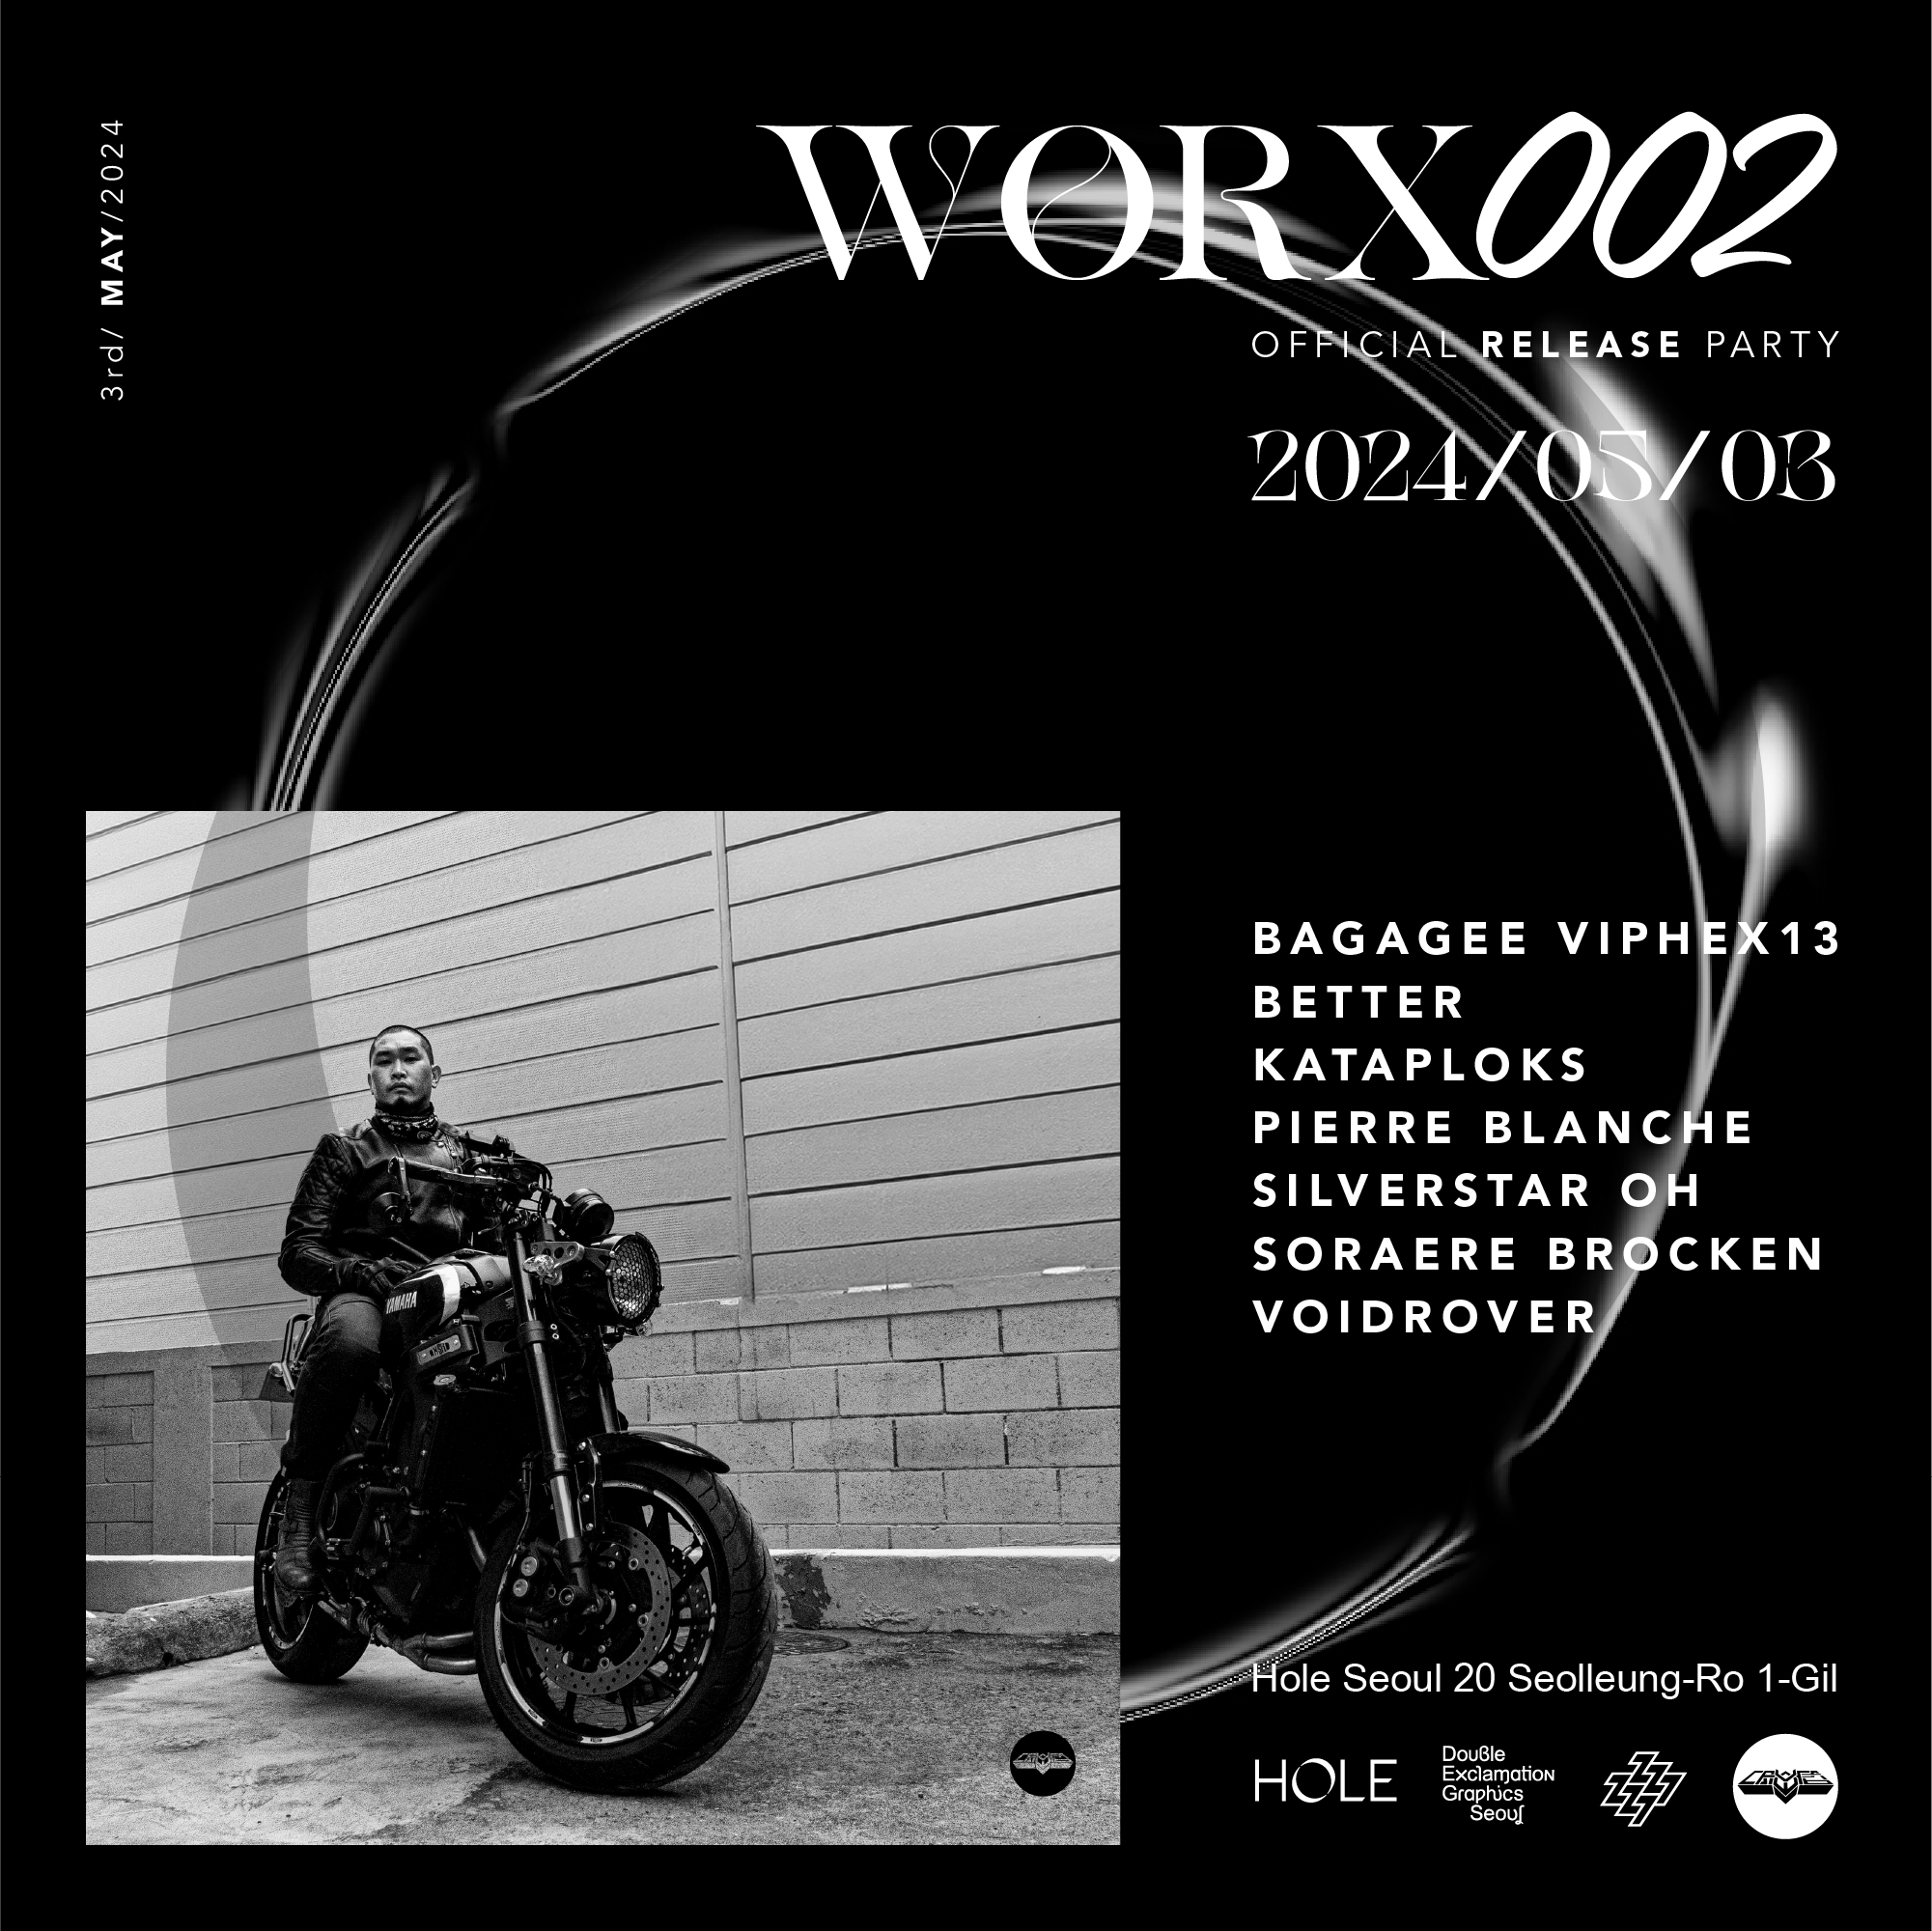 WORX002 Official Release Party - Página frontal